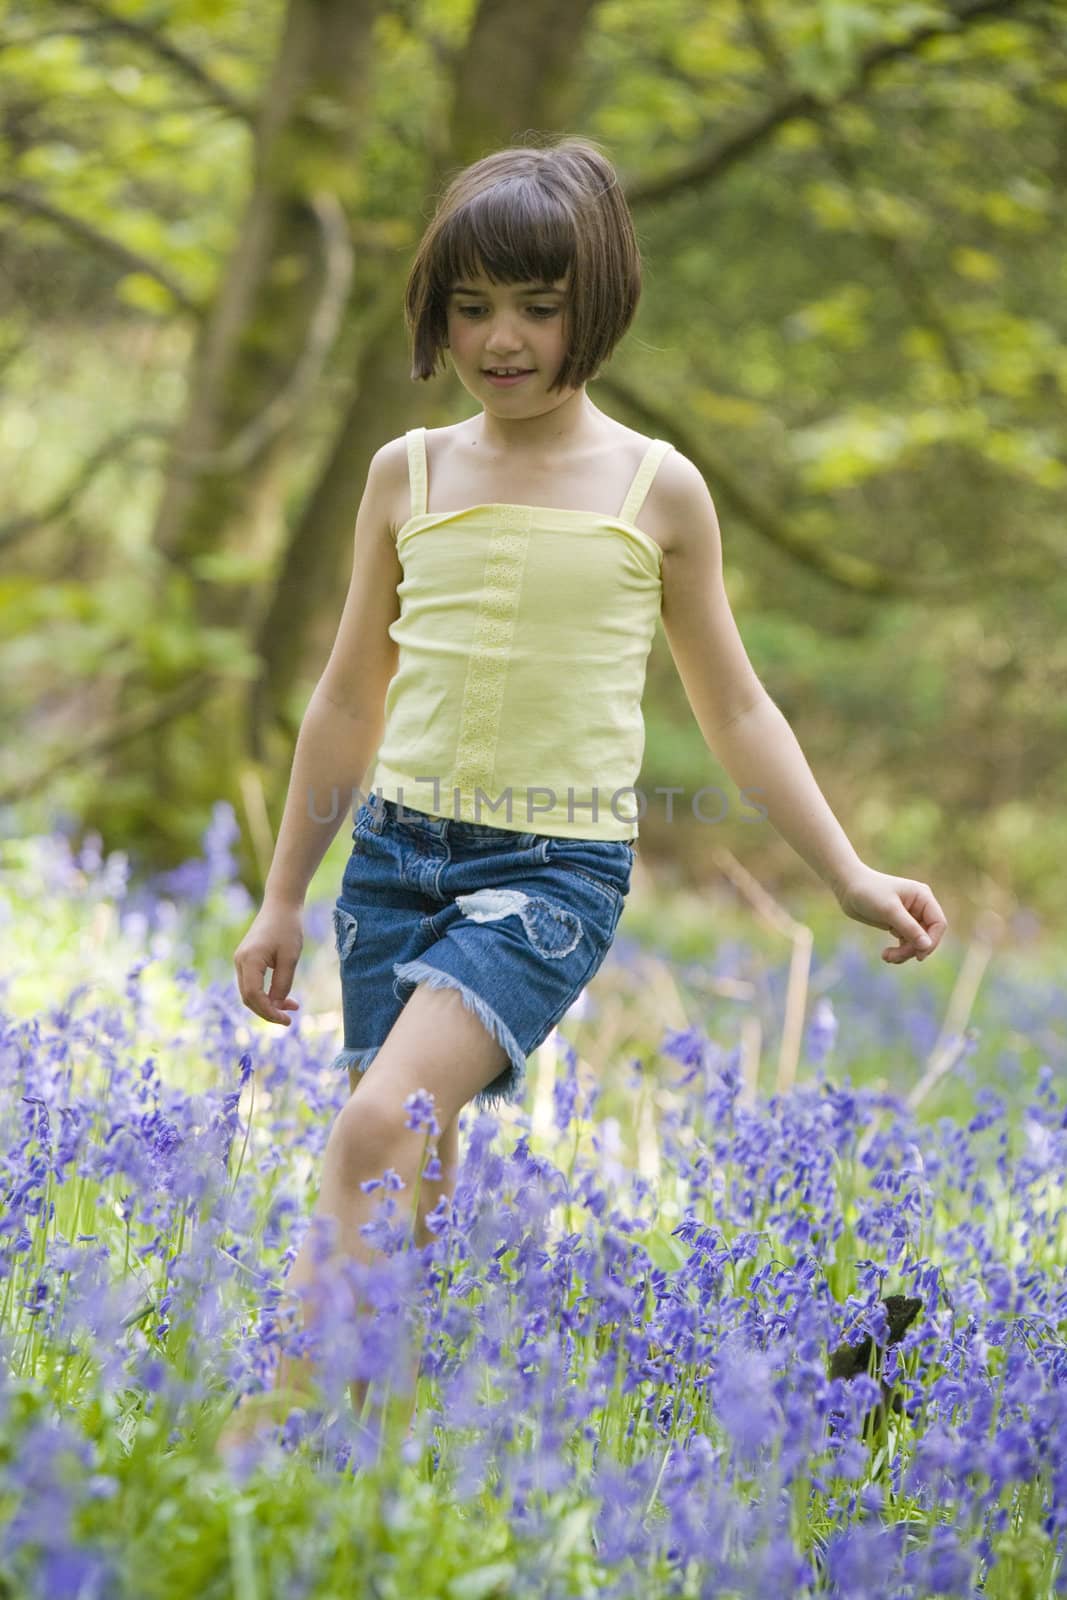 girl in blubells by gemphotography